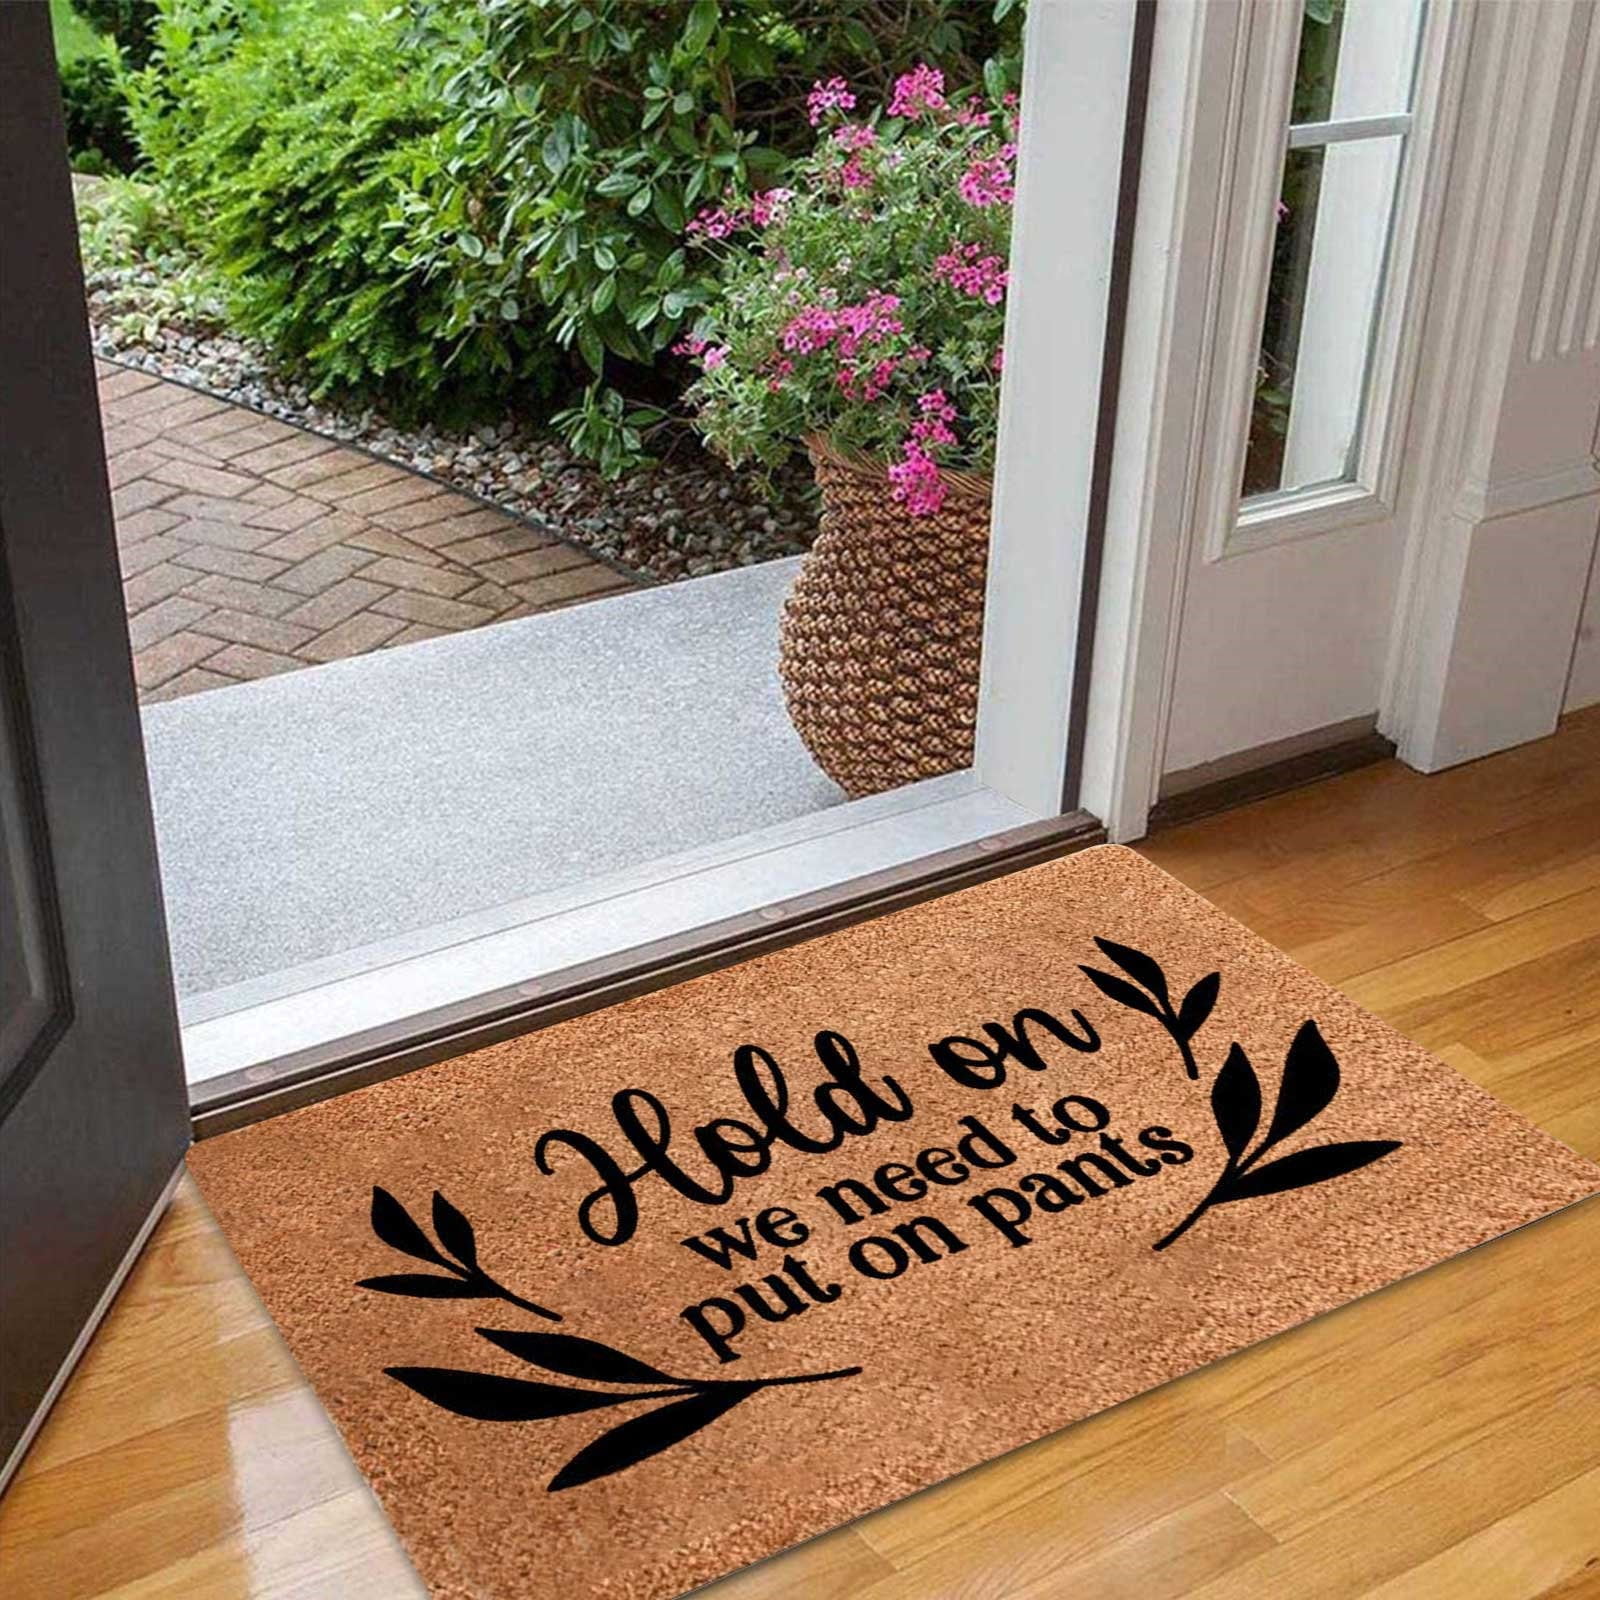 Outdoor Mat - Come Inside - Funny Welcome Mat for Front Entrances